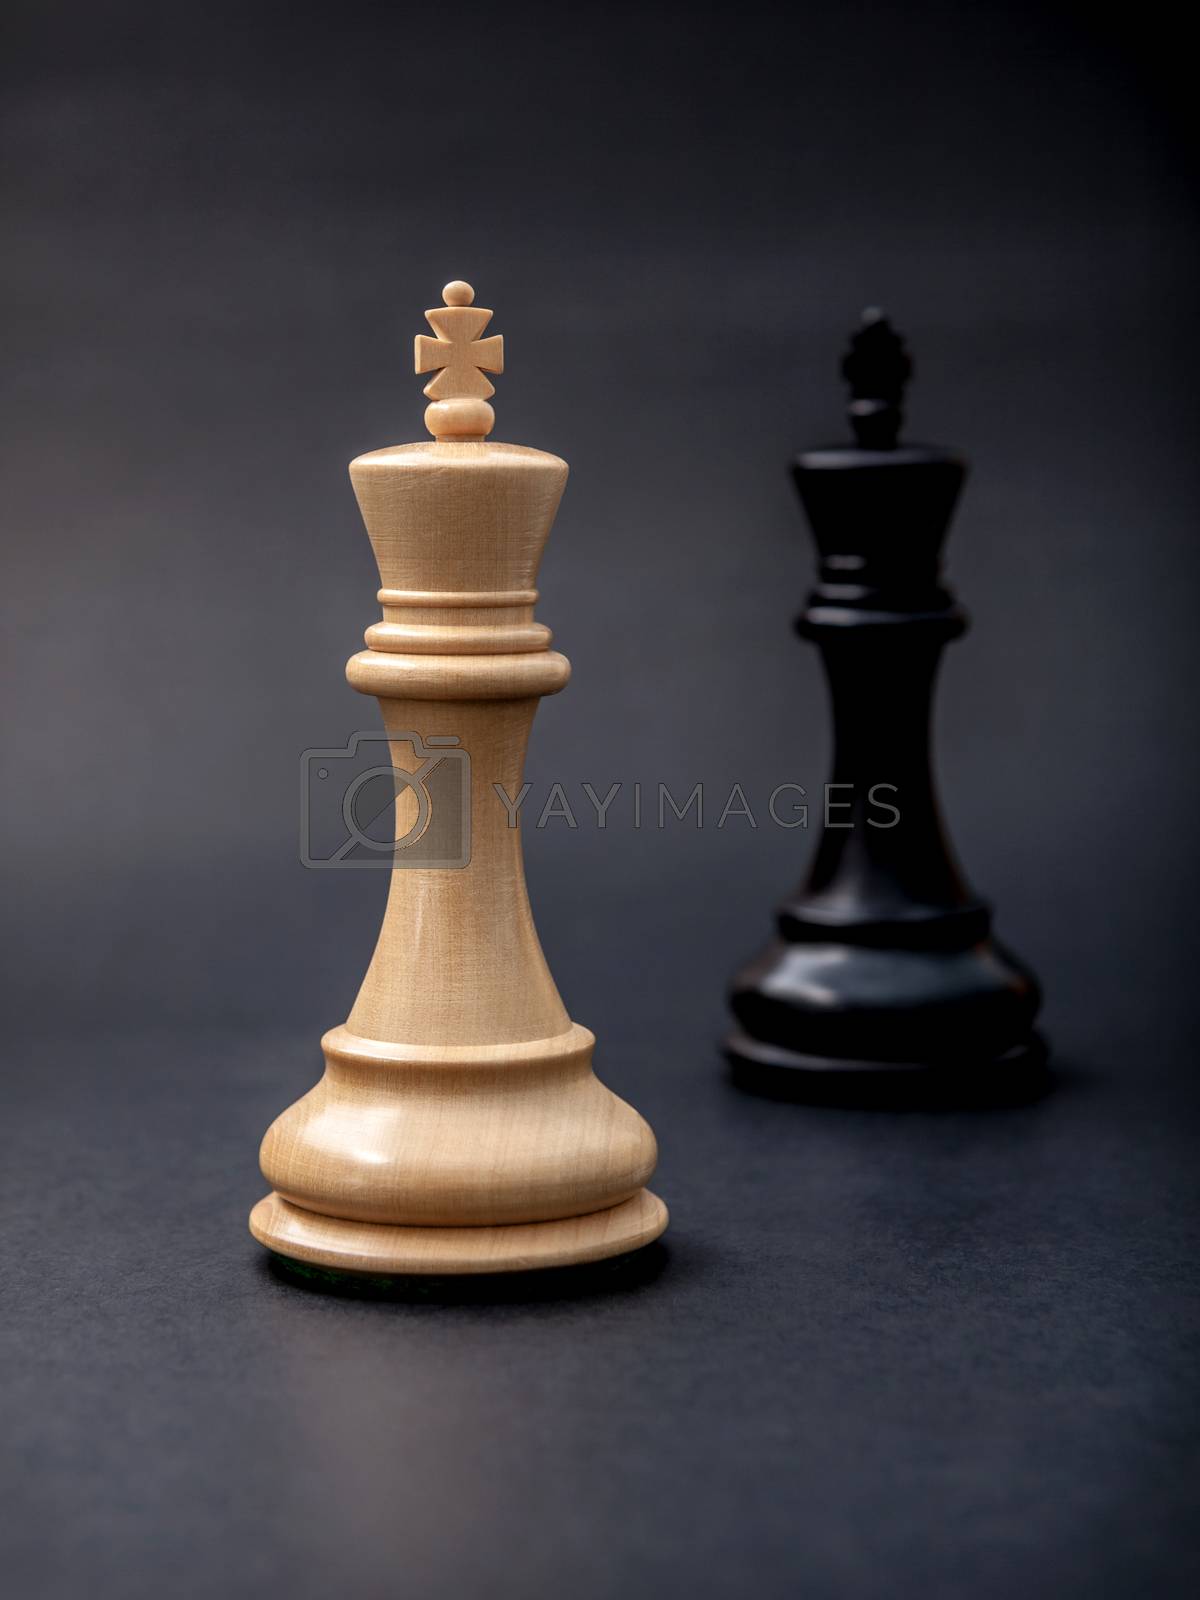 Royalty free image of Black and white king of chess set up on dark background .  by kerdkanno